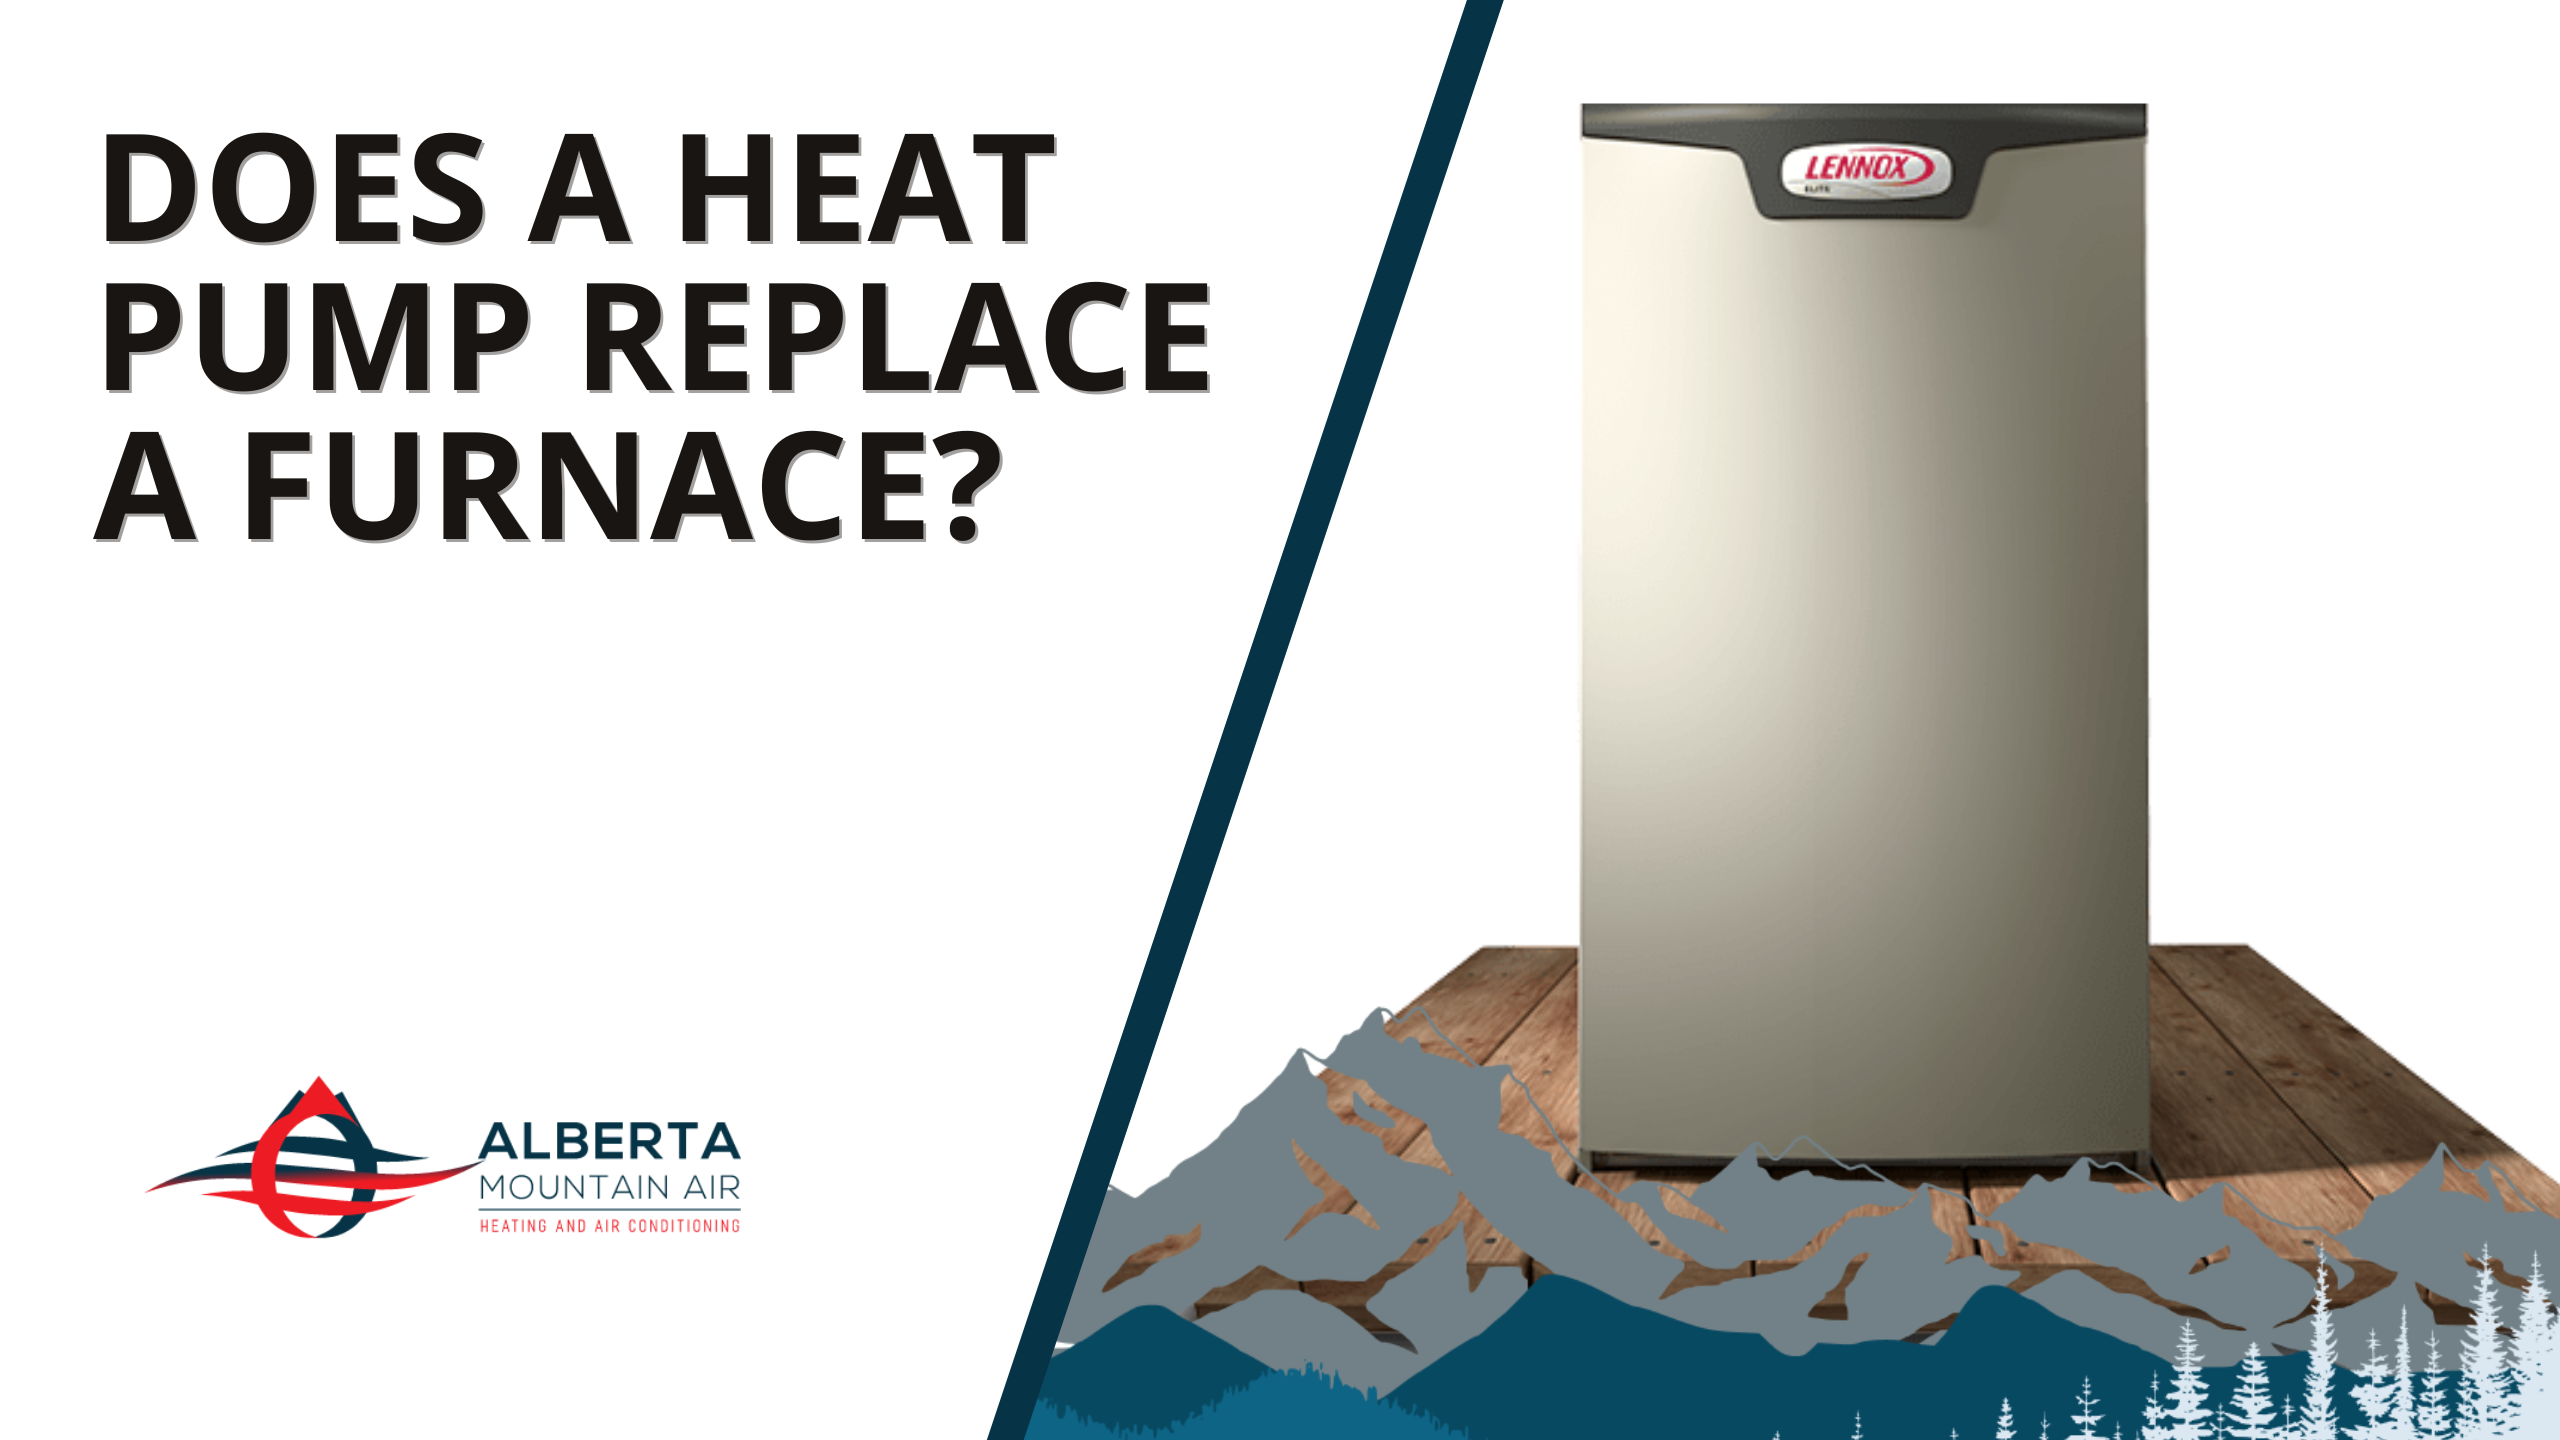 Does a Heat Pump Replace a Furnace?